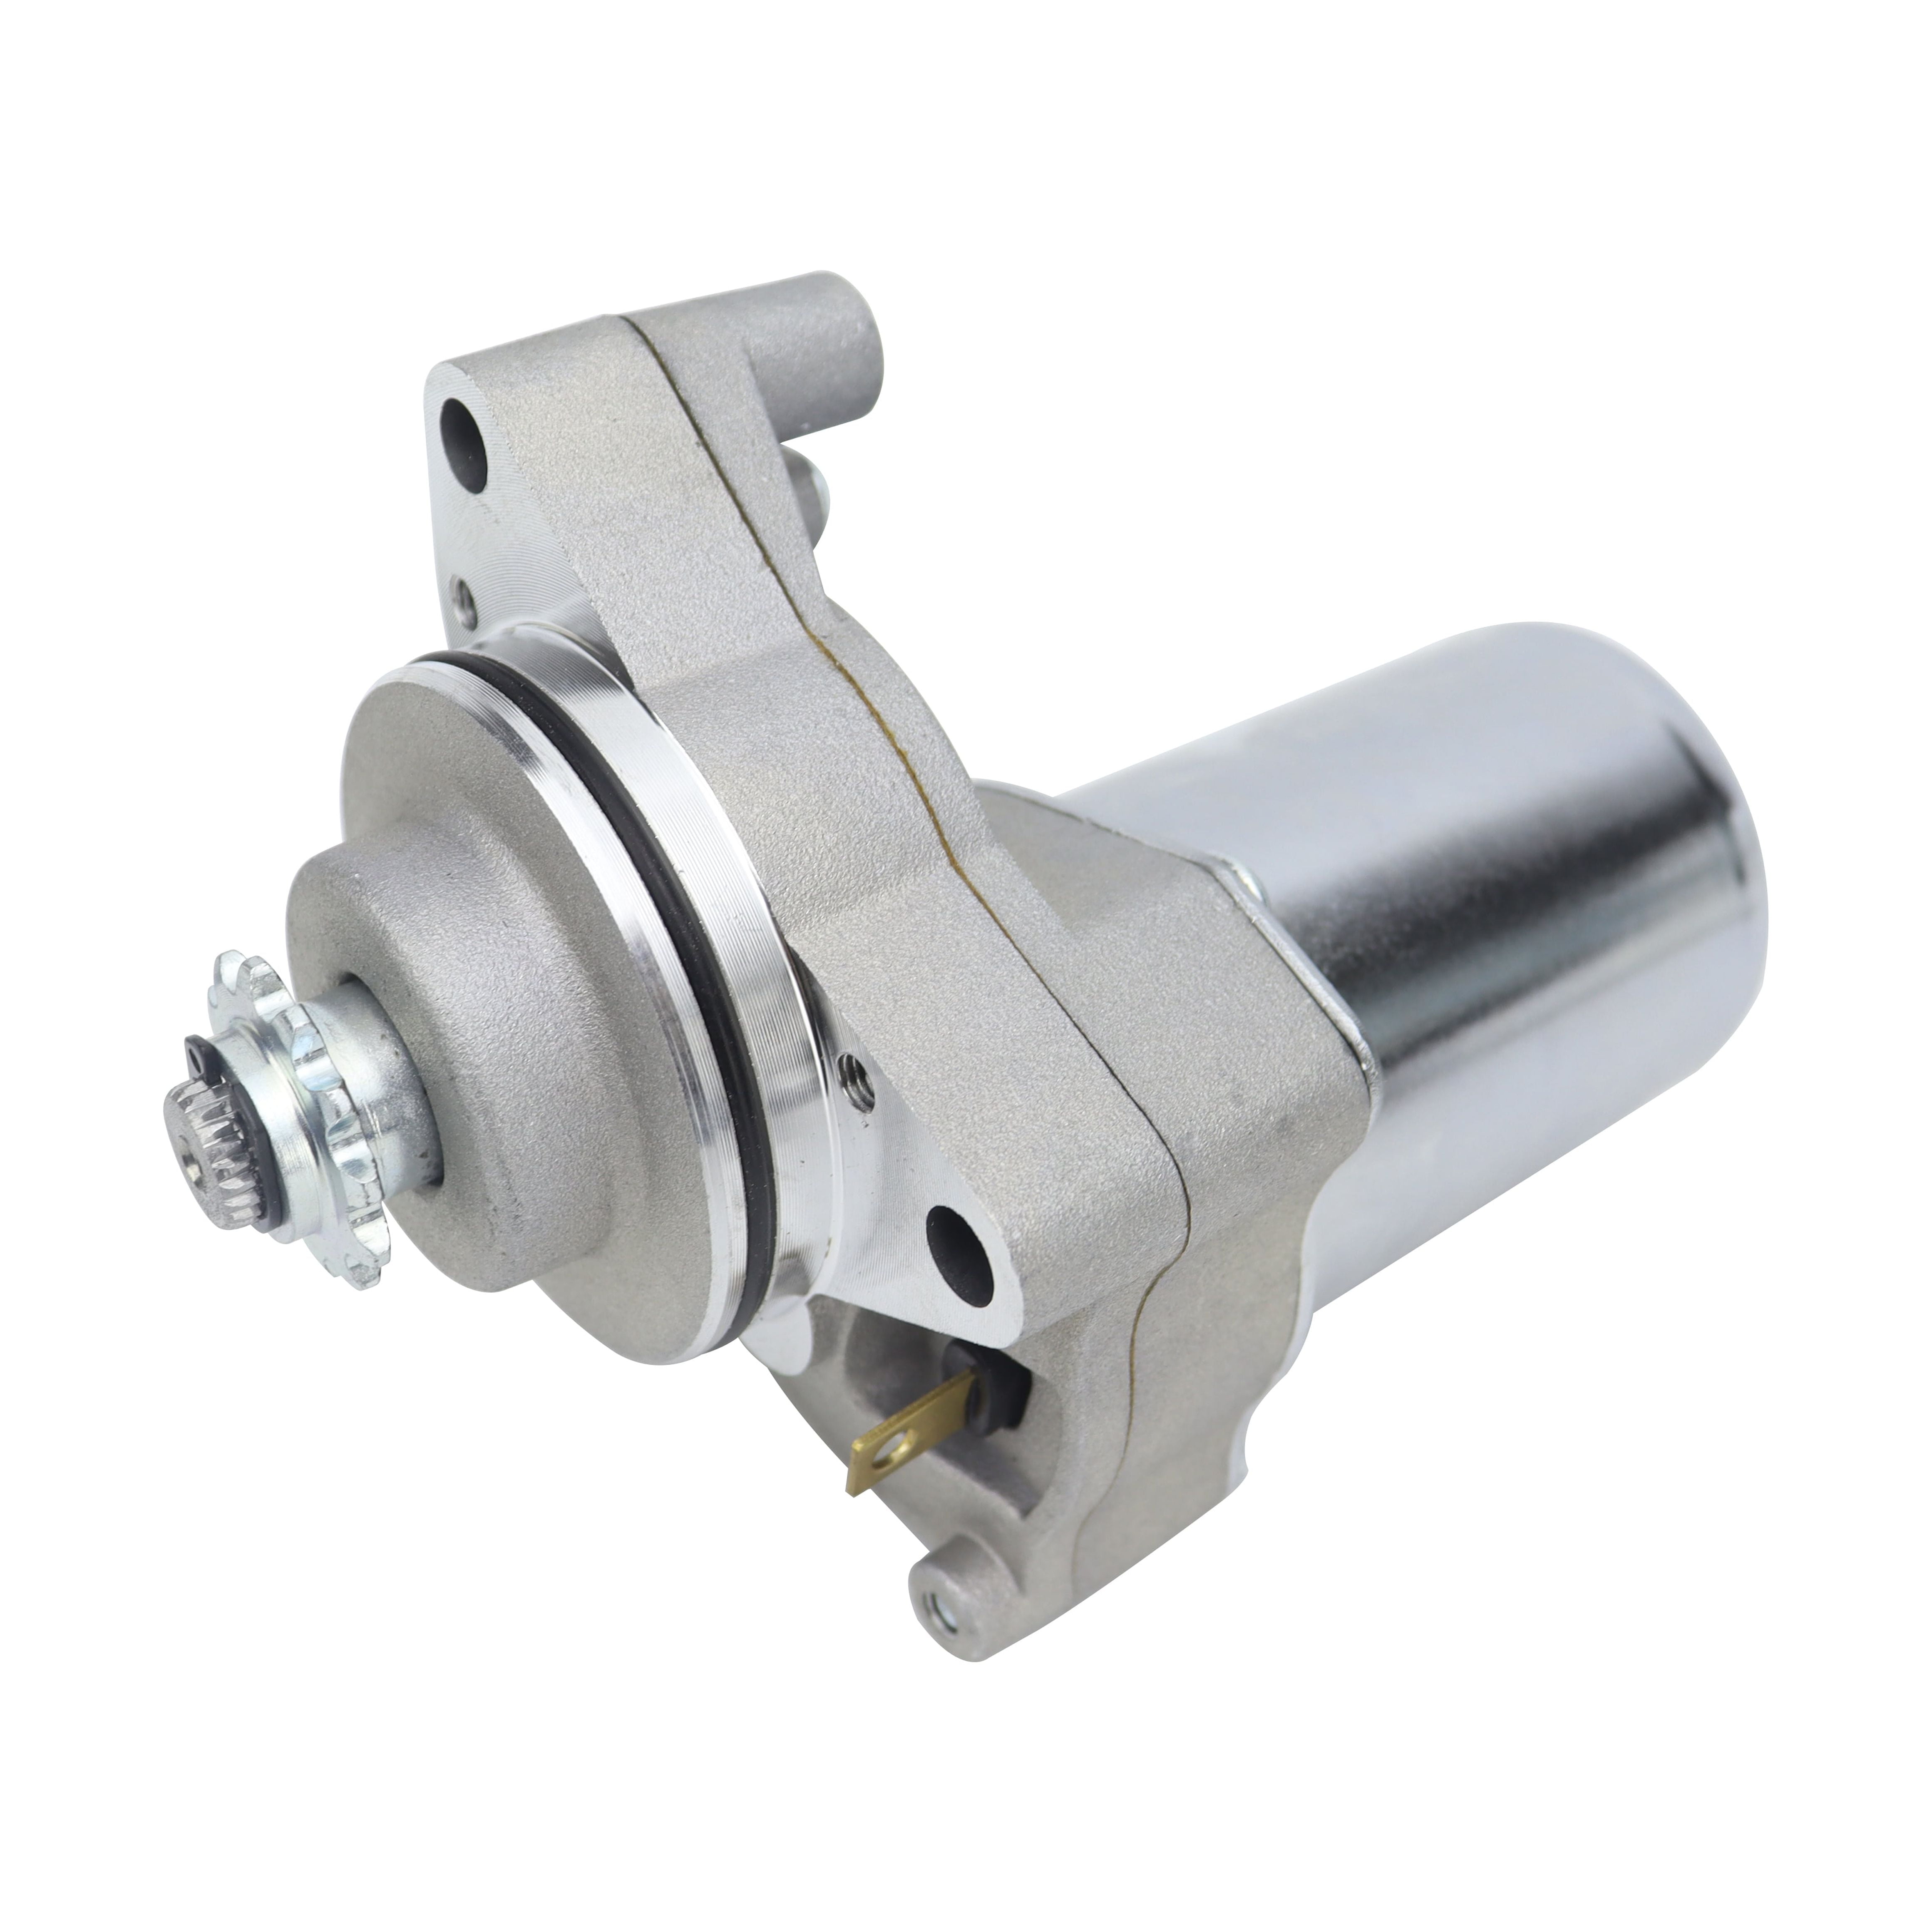  Starter Motor for All GY6-50 (49cc) - QMB139 50cc Scooters Tao  Tao Peace Roketa Ice Bear Coolster : Automotive